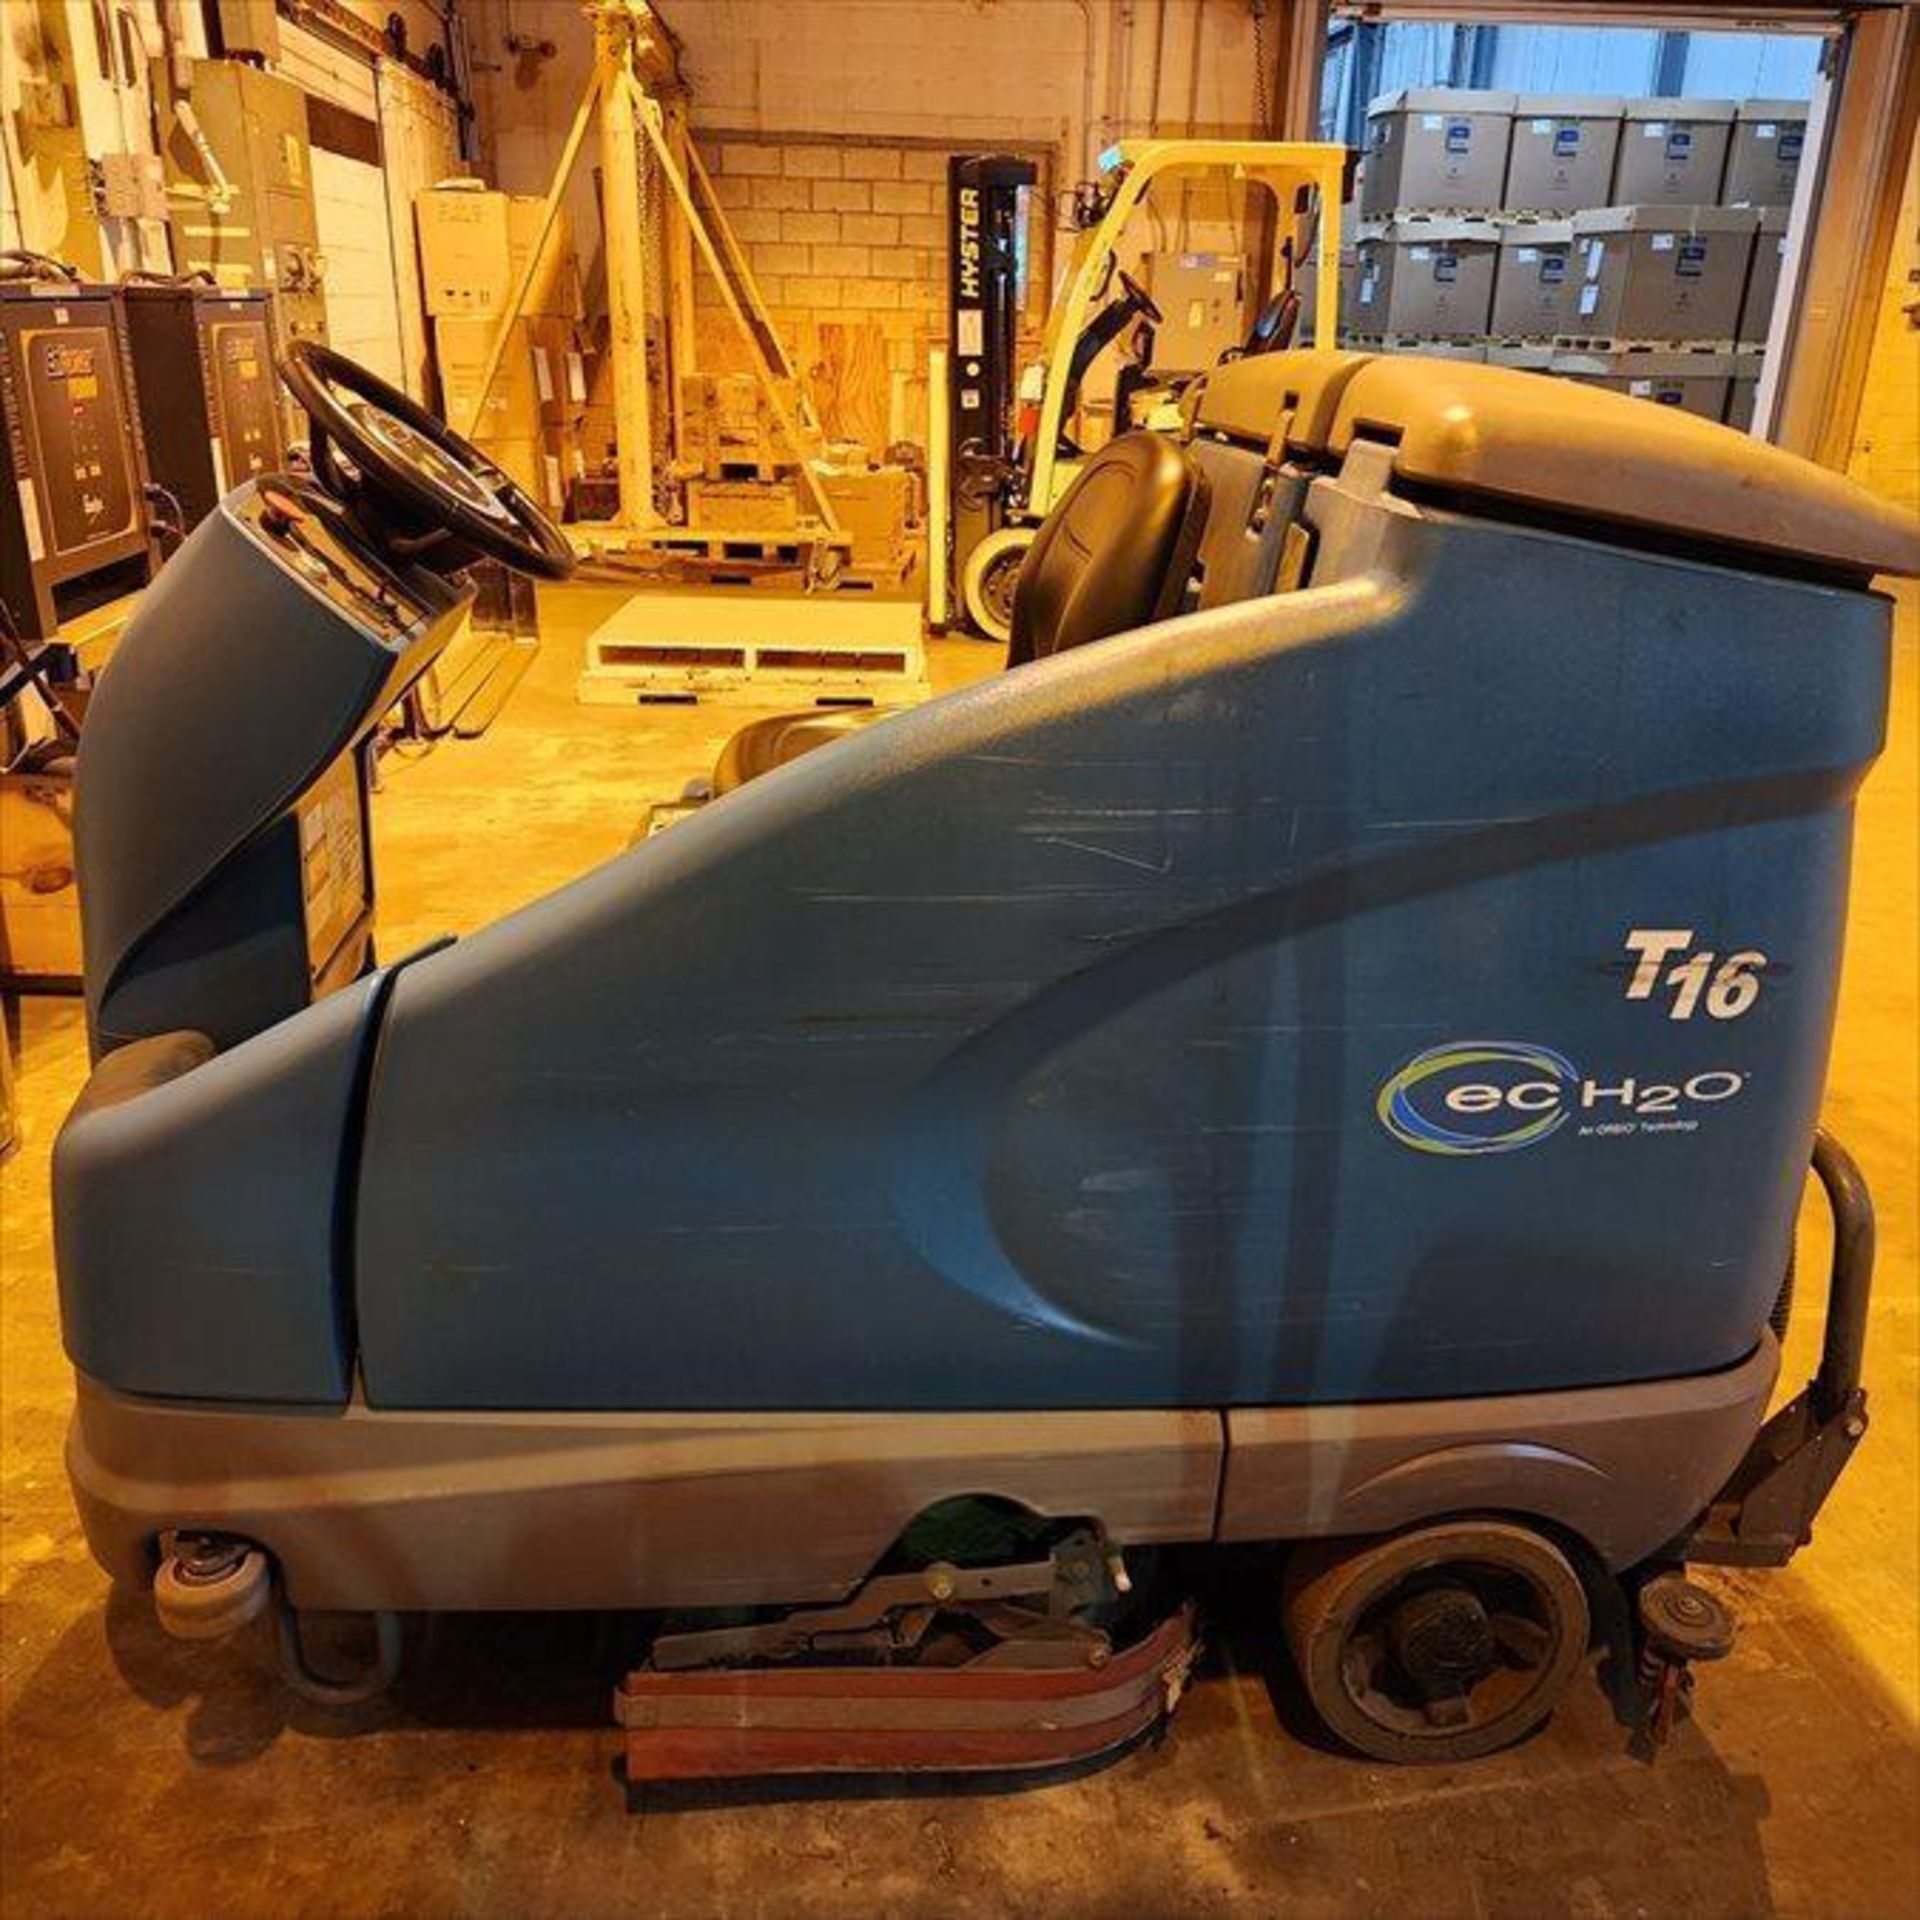 Tennant #T16 Electric Riding Floor Scrubber - Image 2 of 5